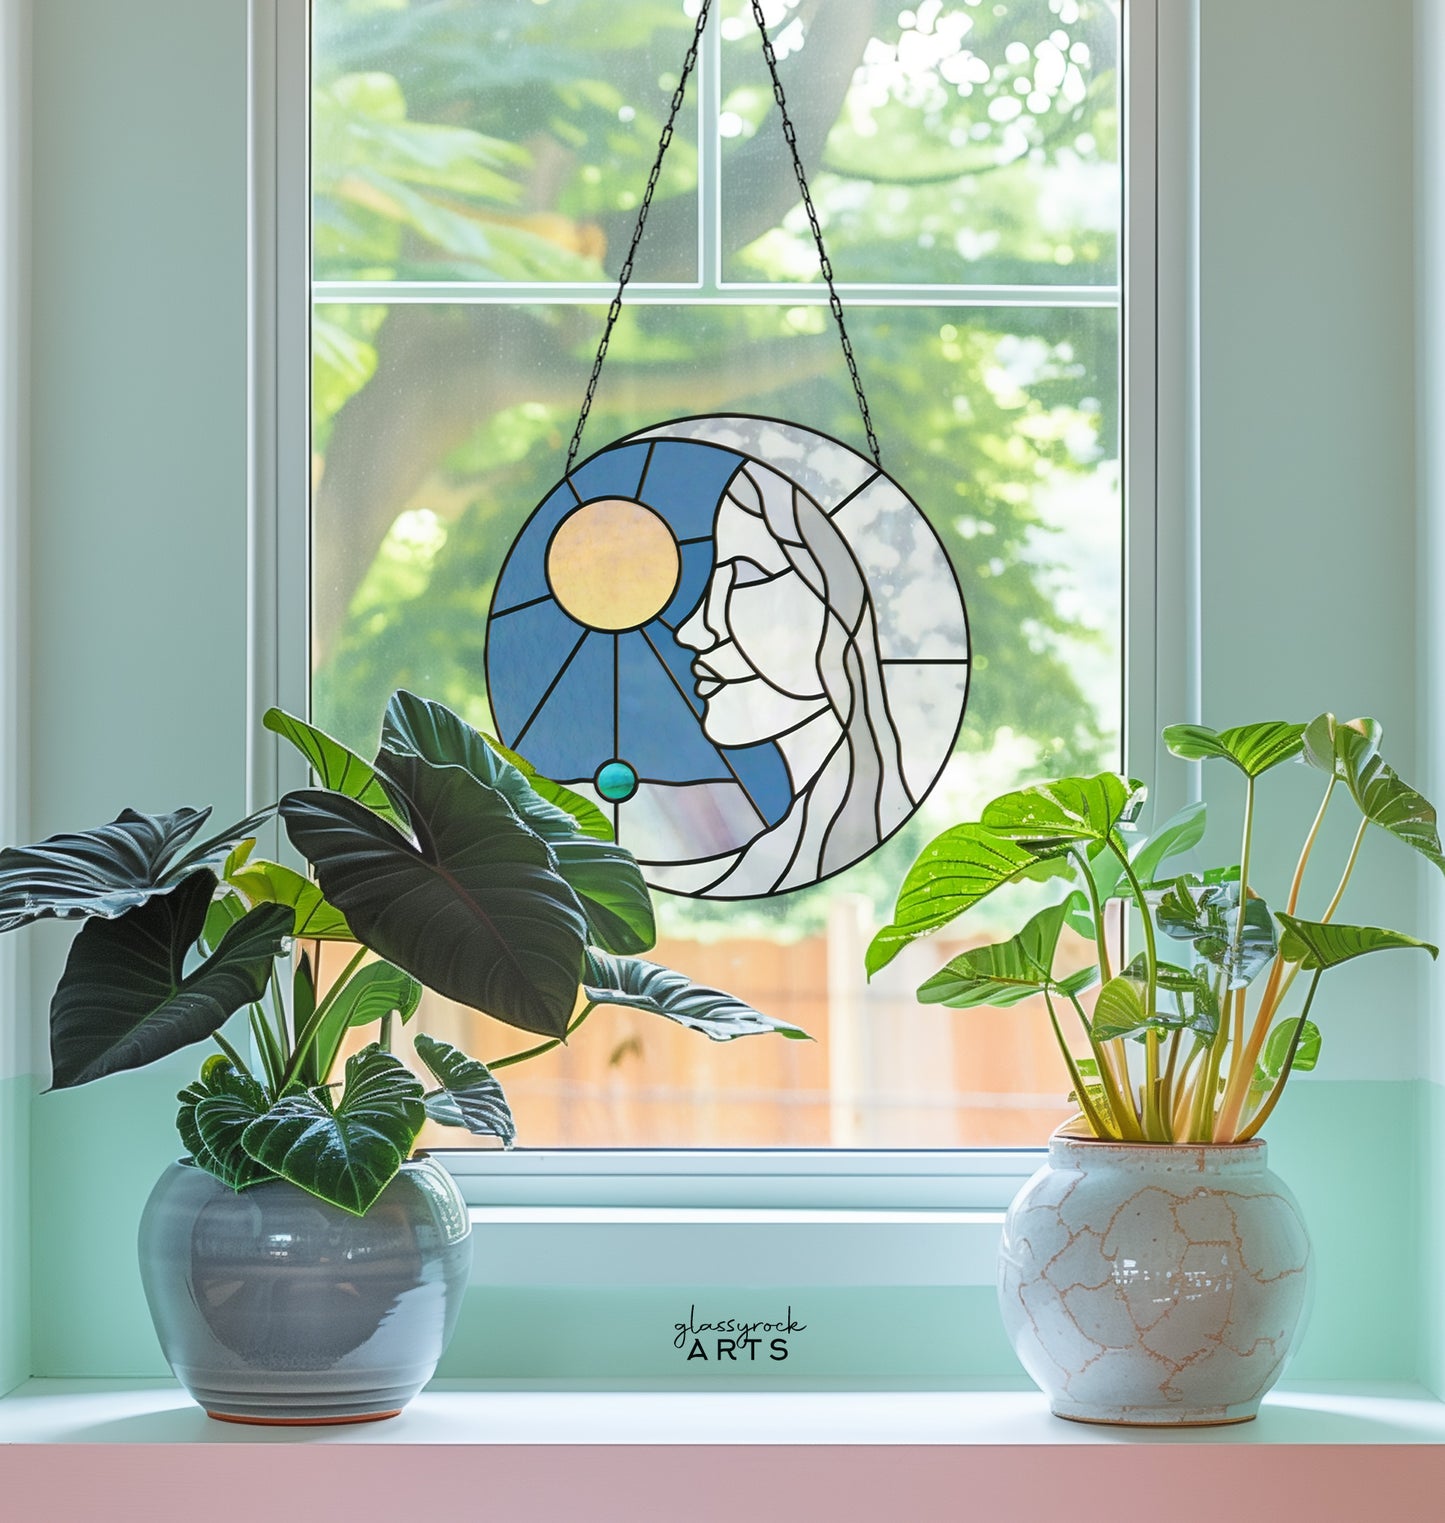 Sun and Moon Woman Stained Glass Pattern